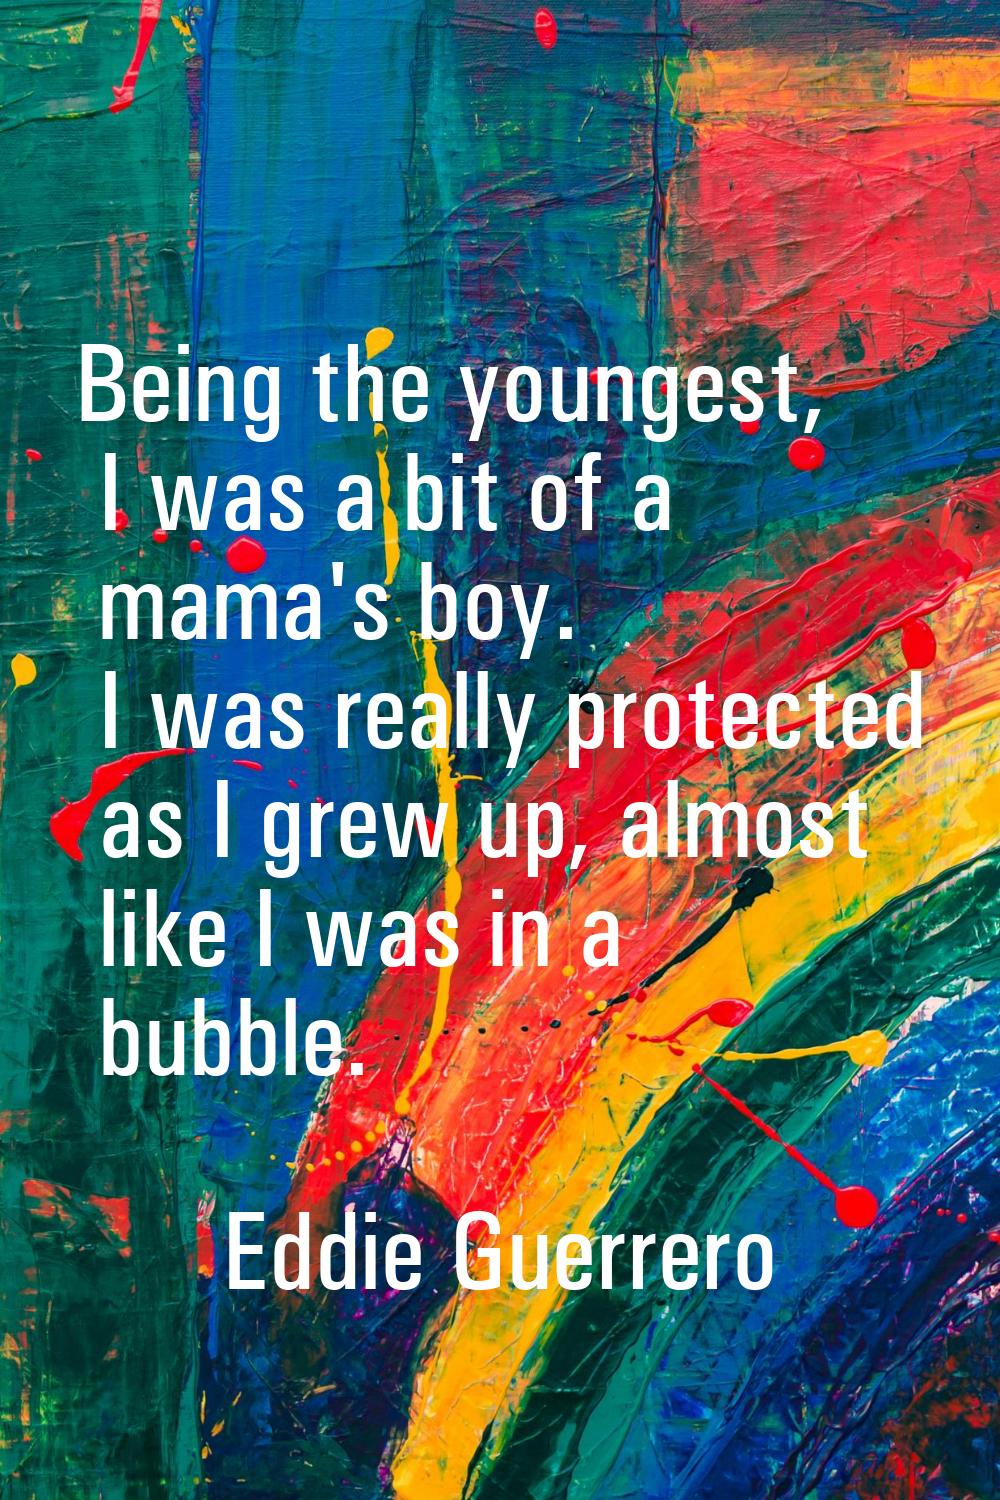 Being the youngest, I was a bit of a mama's boy. I was really protected as I grew up, almost like I